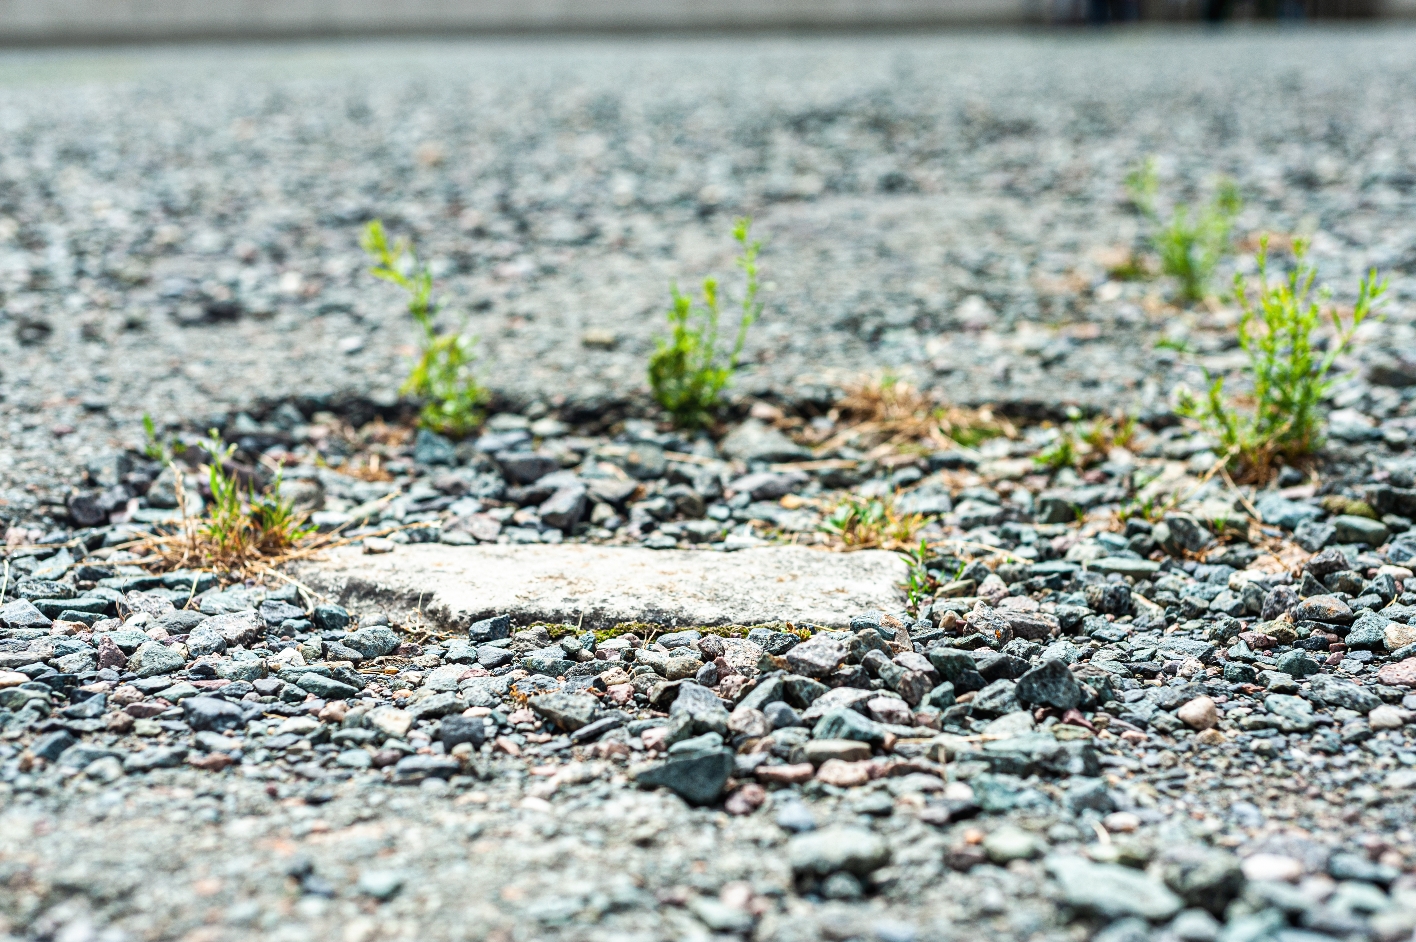 A stone set into old asphalt, white against the gray, crumbling ground.